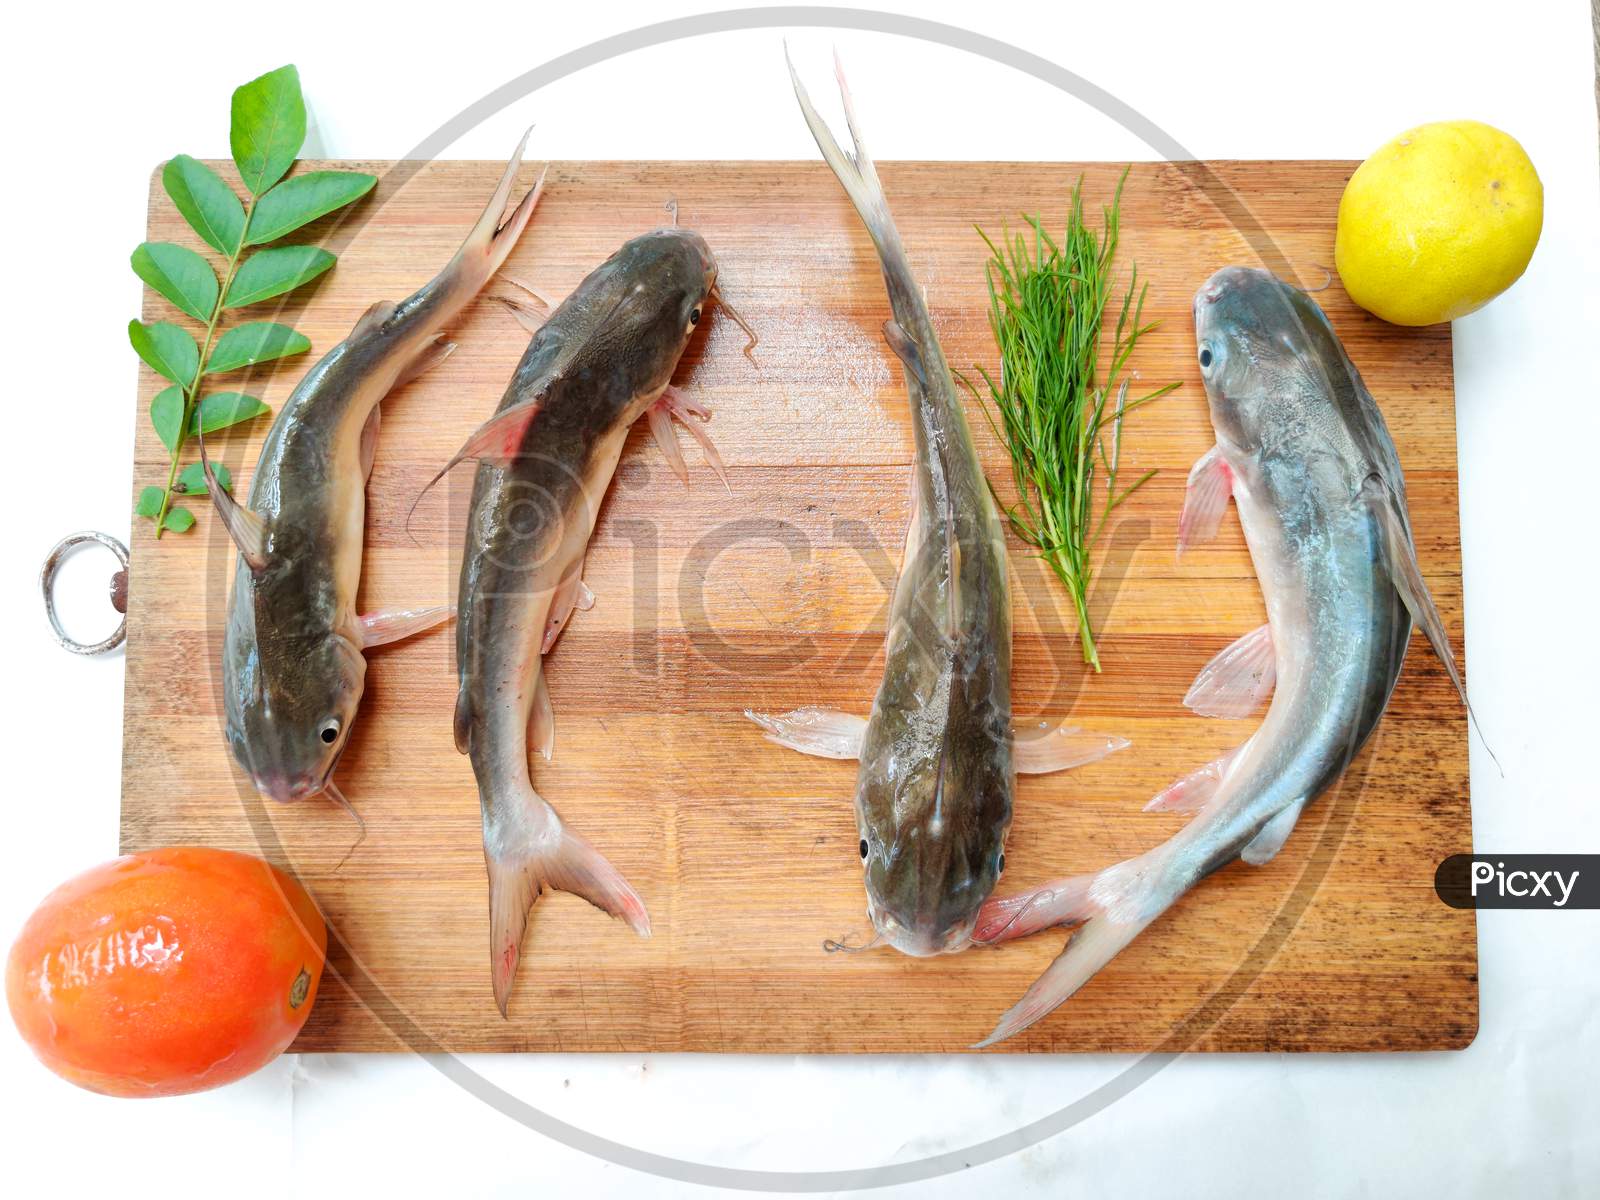 Gafftopsail Cat Fish Fish Decorated With Herbs And Vegetables .Selective Focus.